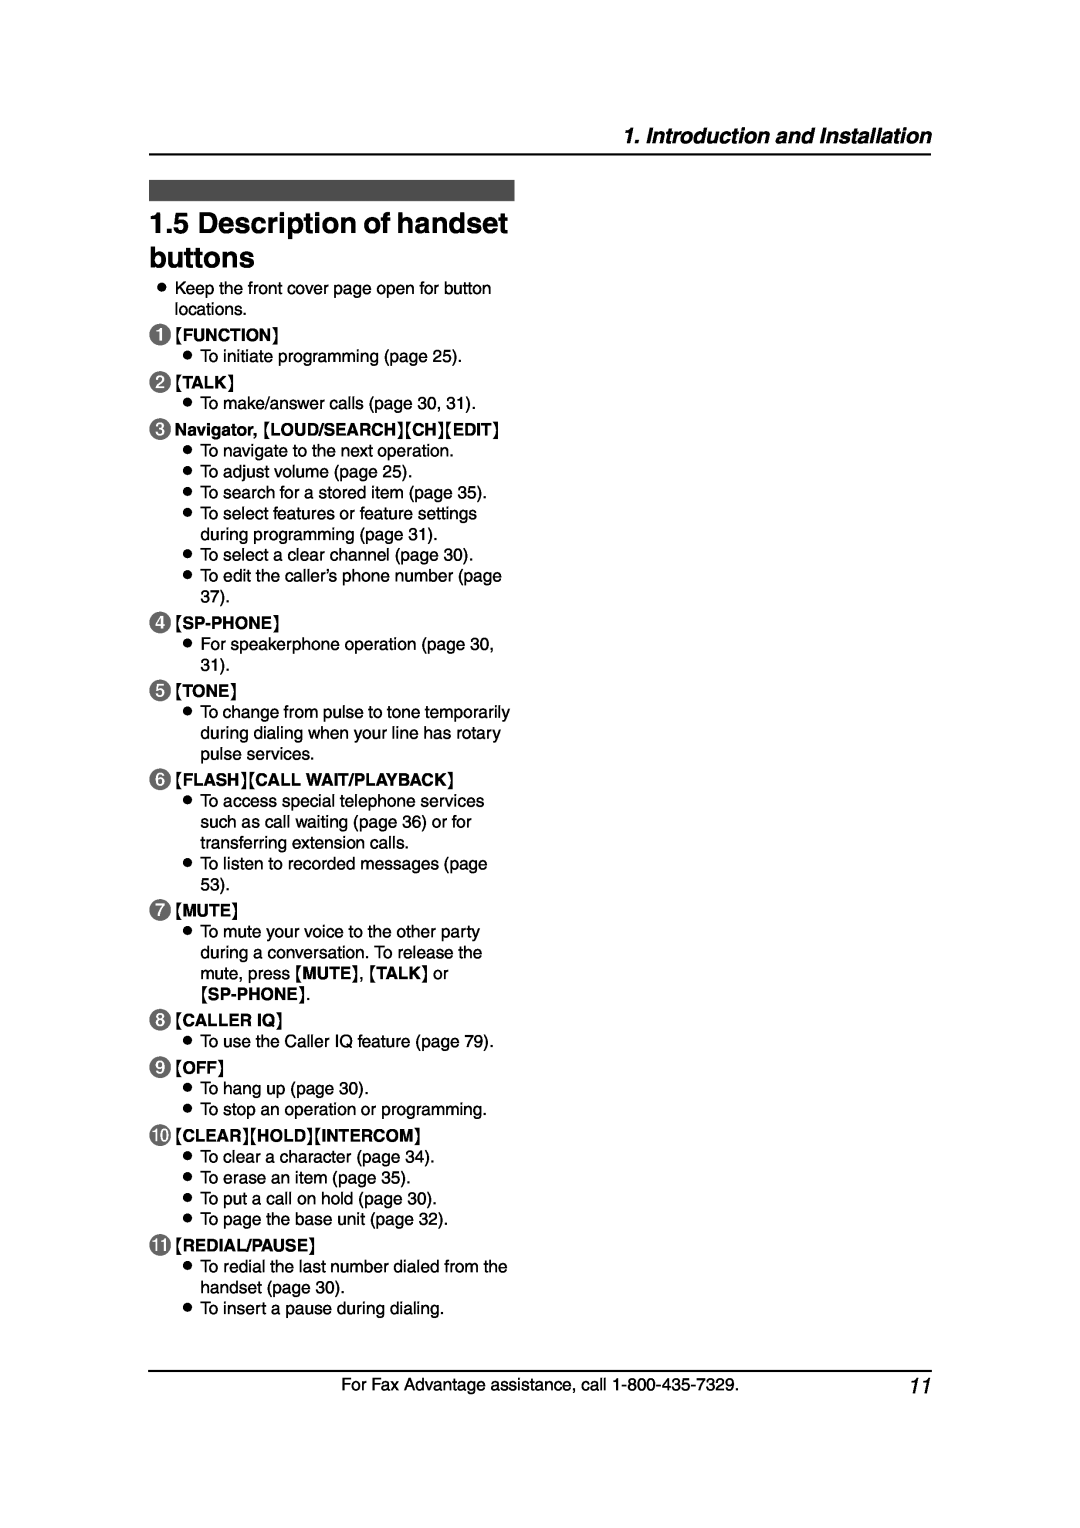 Panasonic KX-FPG377, KX-FPG376 manual Description of handset buttons, Introduction and Installation 